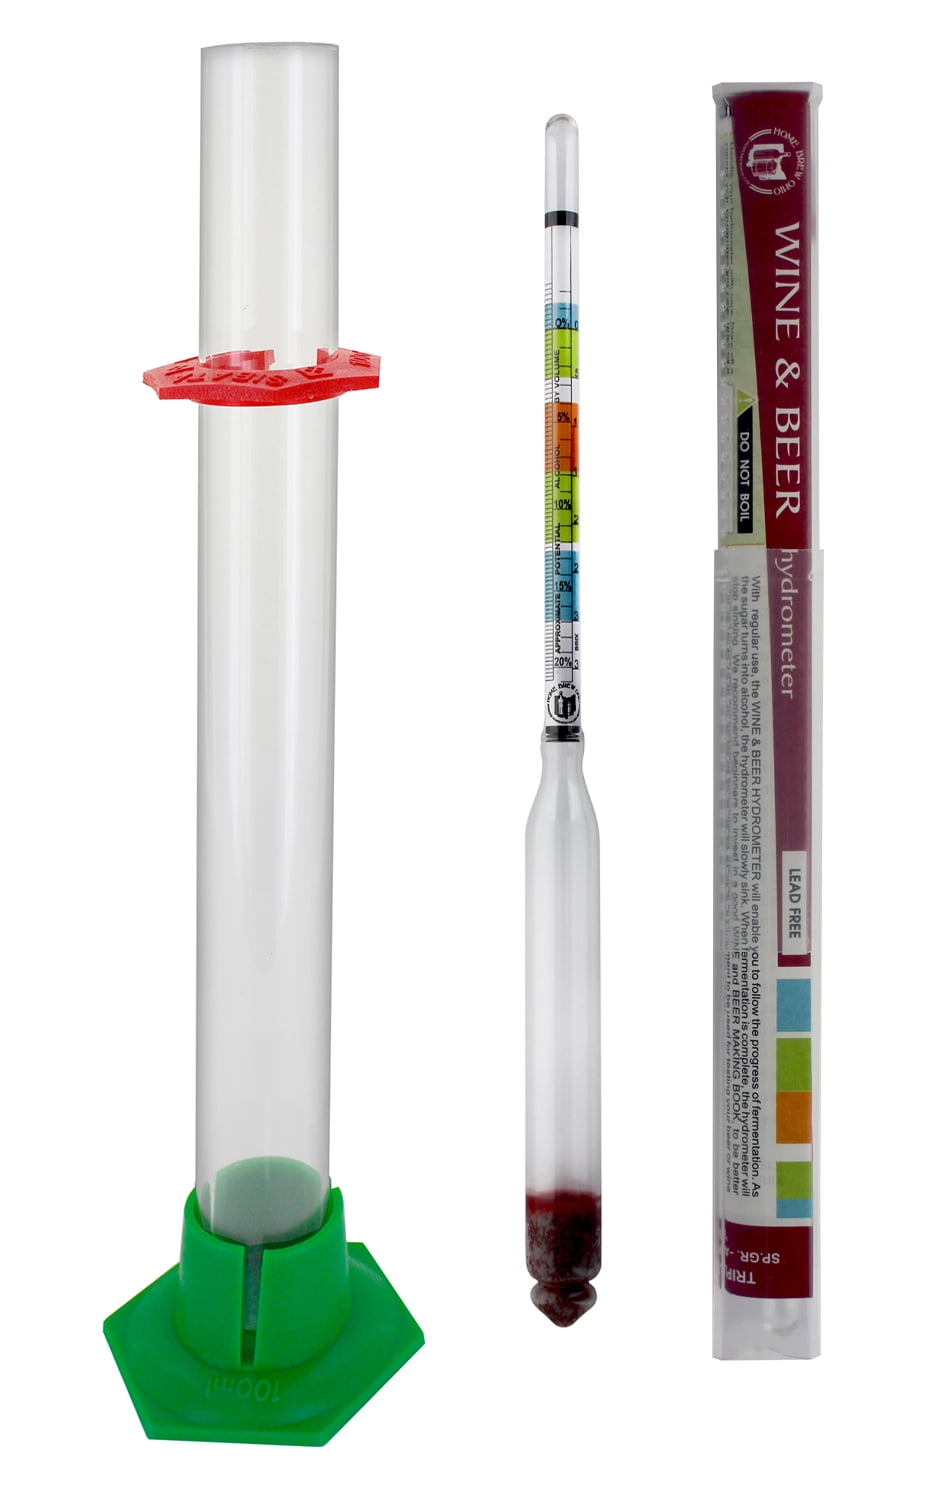 Hydrometer For Home Brew Testing During Wine and Beer Making Essential Home Brew Hydrometer Equipment 